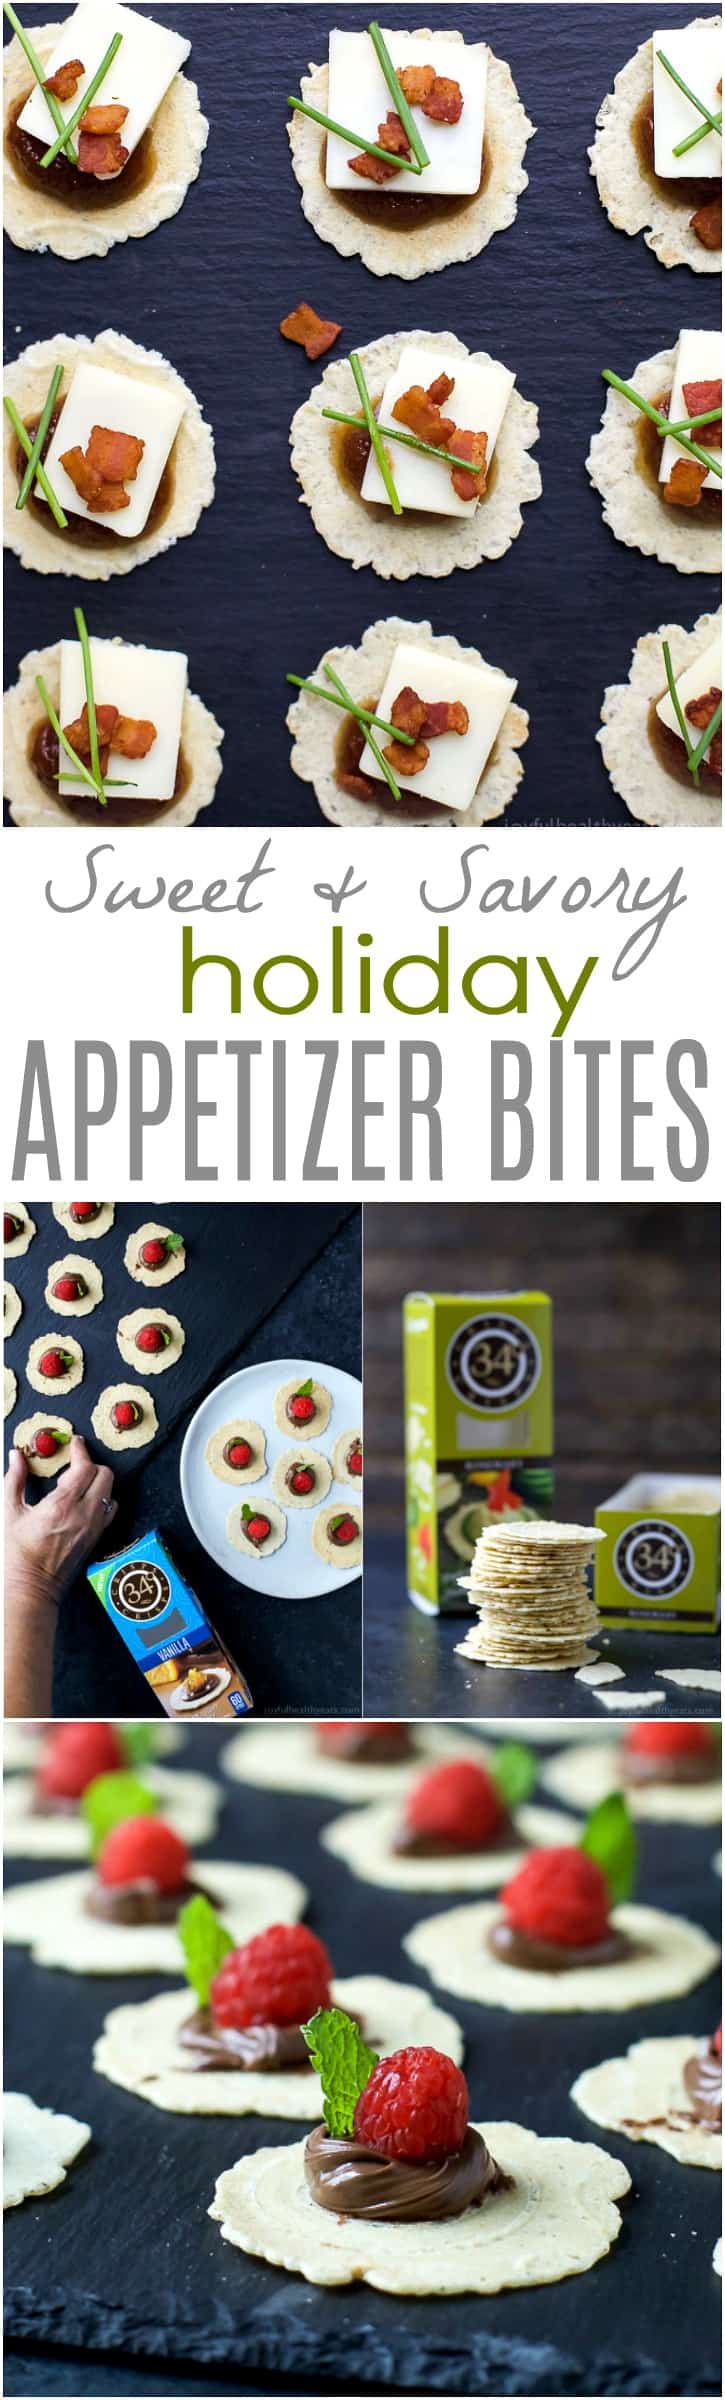 A Collage Showing Pictures of Sweet and Savory Appetizer Bites and Introducing the Recipe with Text